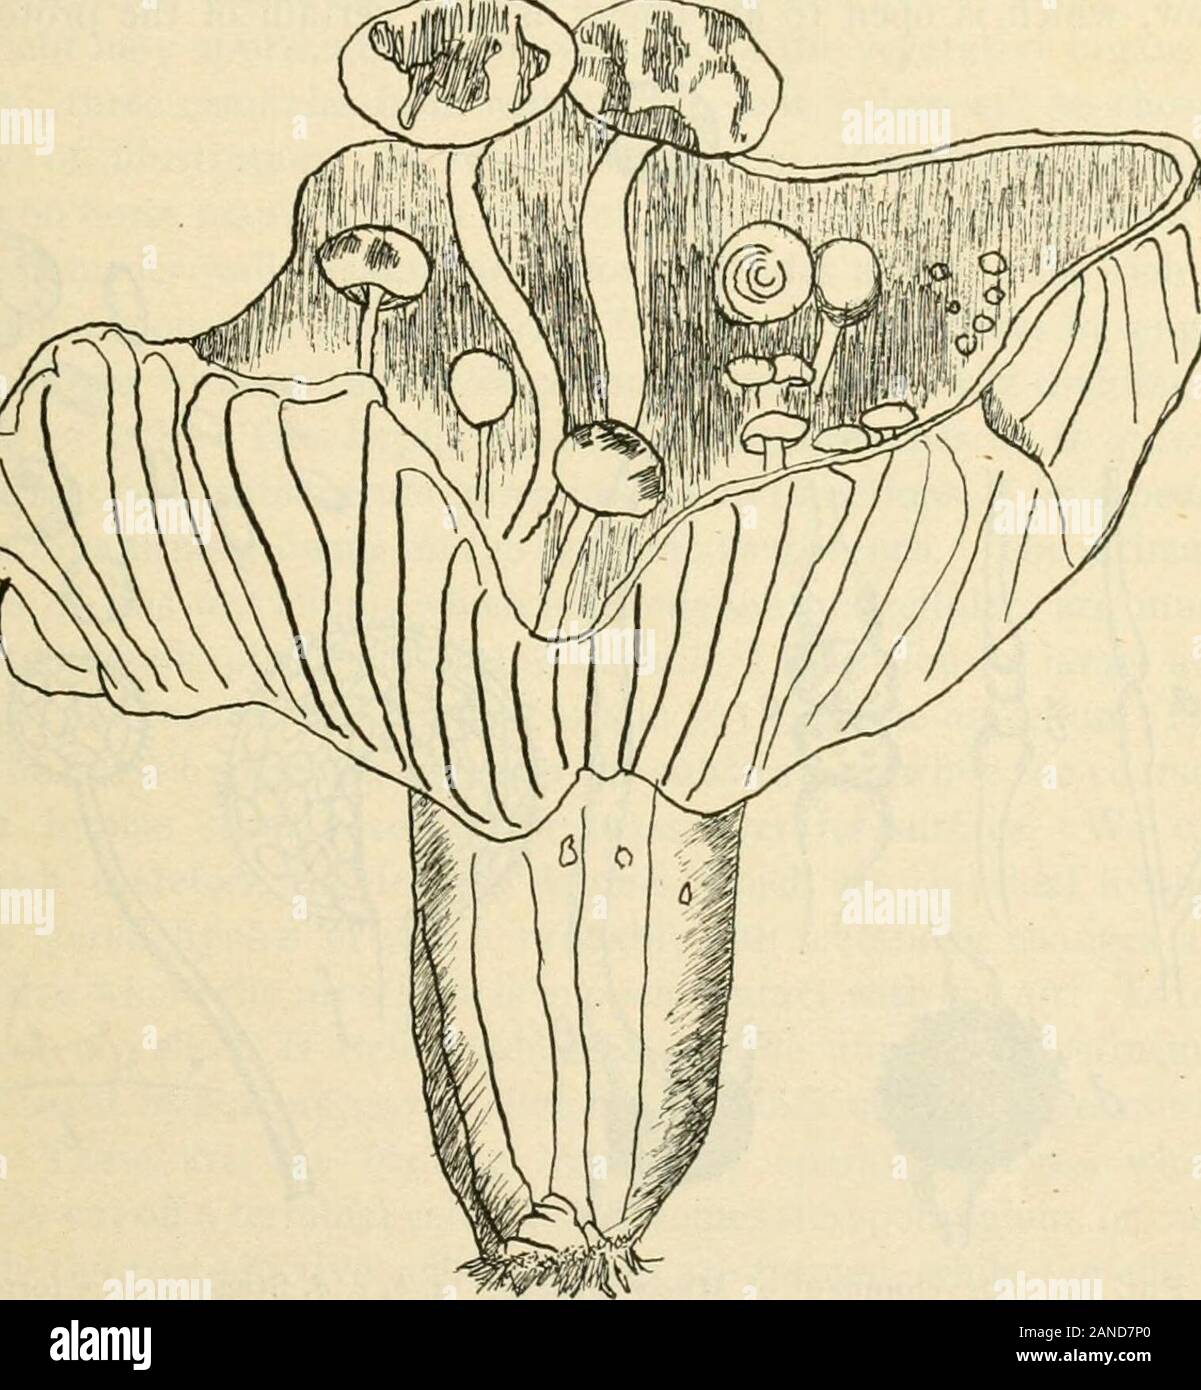 A text-book of mycology and plant pathology . Fig. II.—Gray mould, Mucoy,showing mycelium and the sporan-gia on upright sporangiophores.{After Conn.) CHARACTERISTICS OF THE TRUE FUNGI 43 gradations which preclude an absolute pronouncement as to whethera plant is a saprophyte, or a parasite..^ Botanists generally concedethat the true fungi have been derived from filamentous algal ancestorsand the groups of algas from which the principal forms of fungi have (. Fig. 12.—Russula nigricans parasitized by Nyctalis aslerophora. {After Brefeld.) been derived are fairly well known. For example, it is b Stock Photo